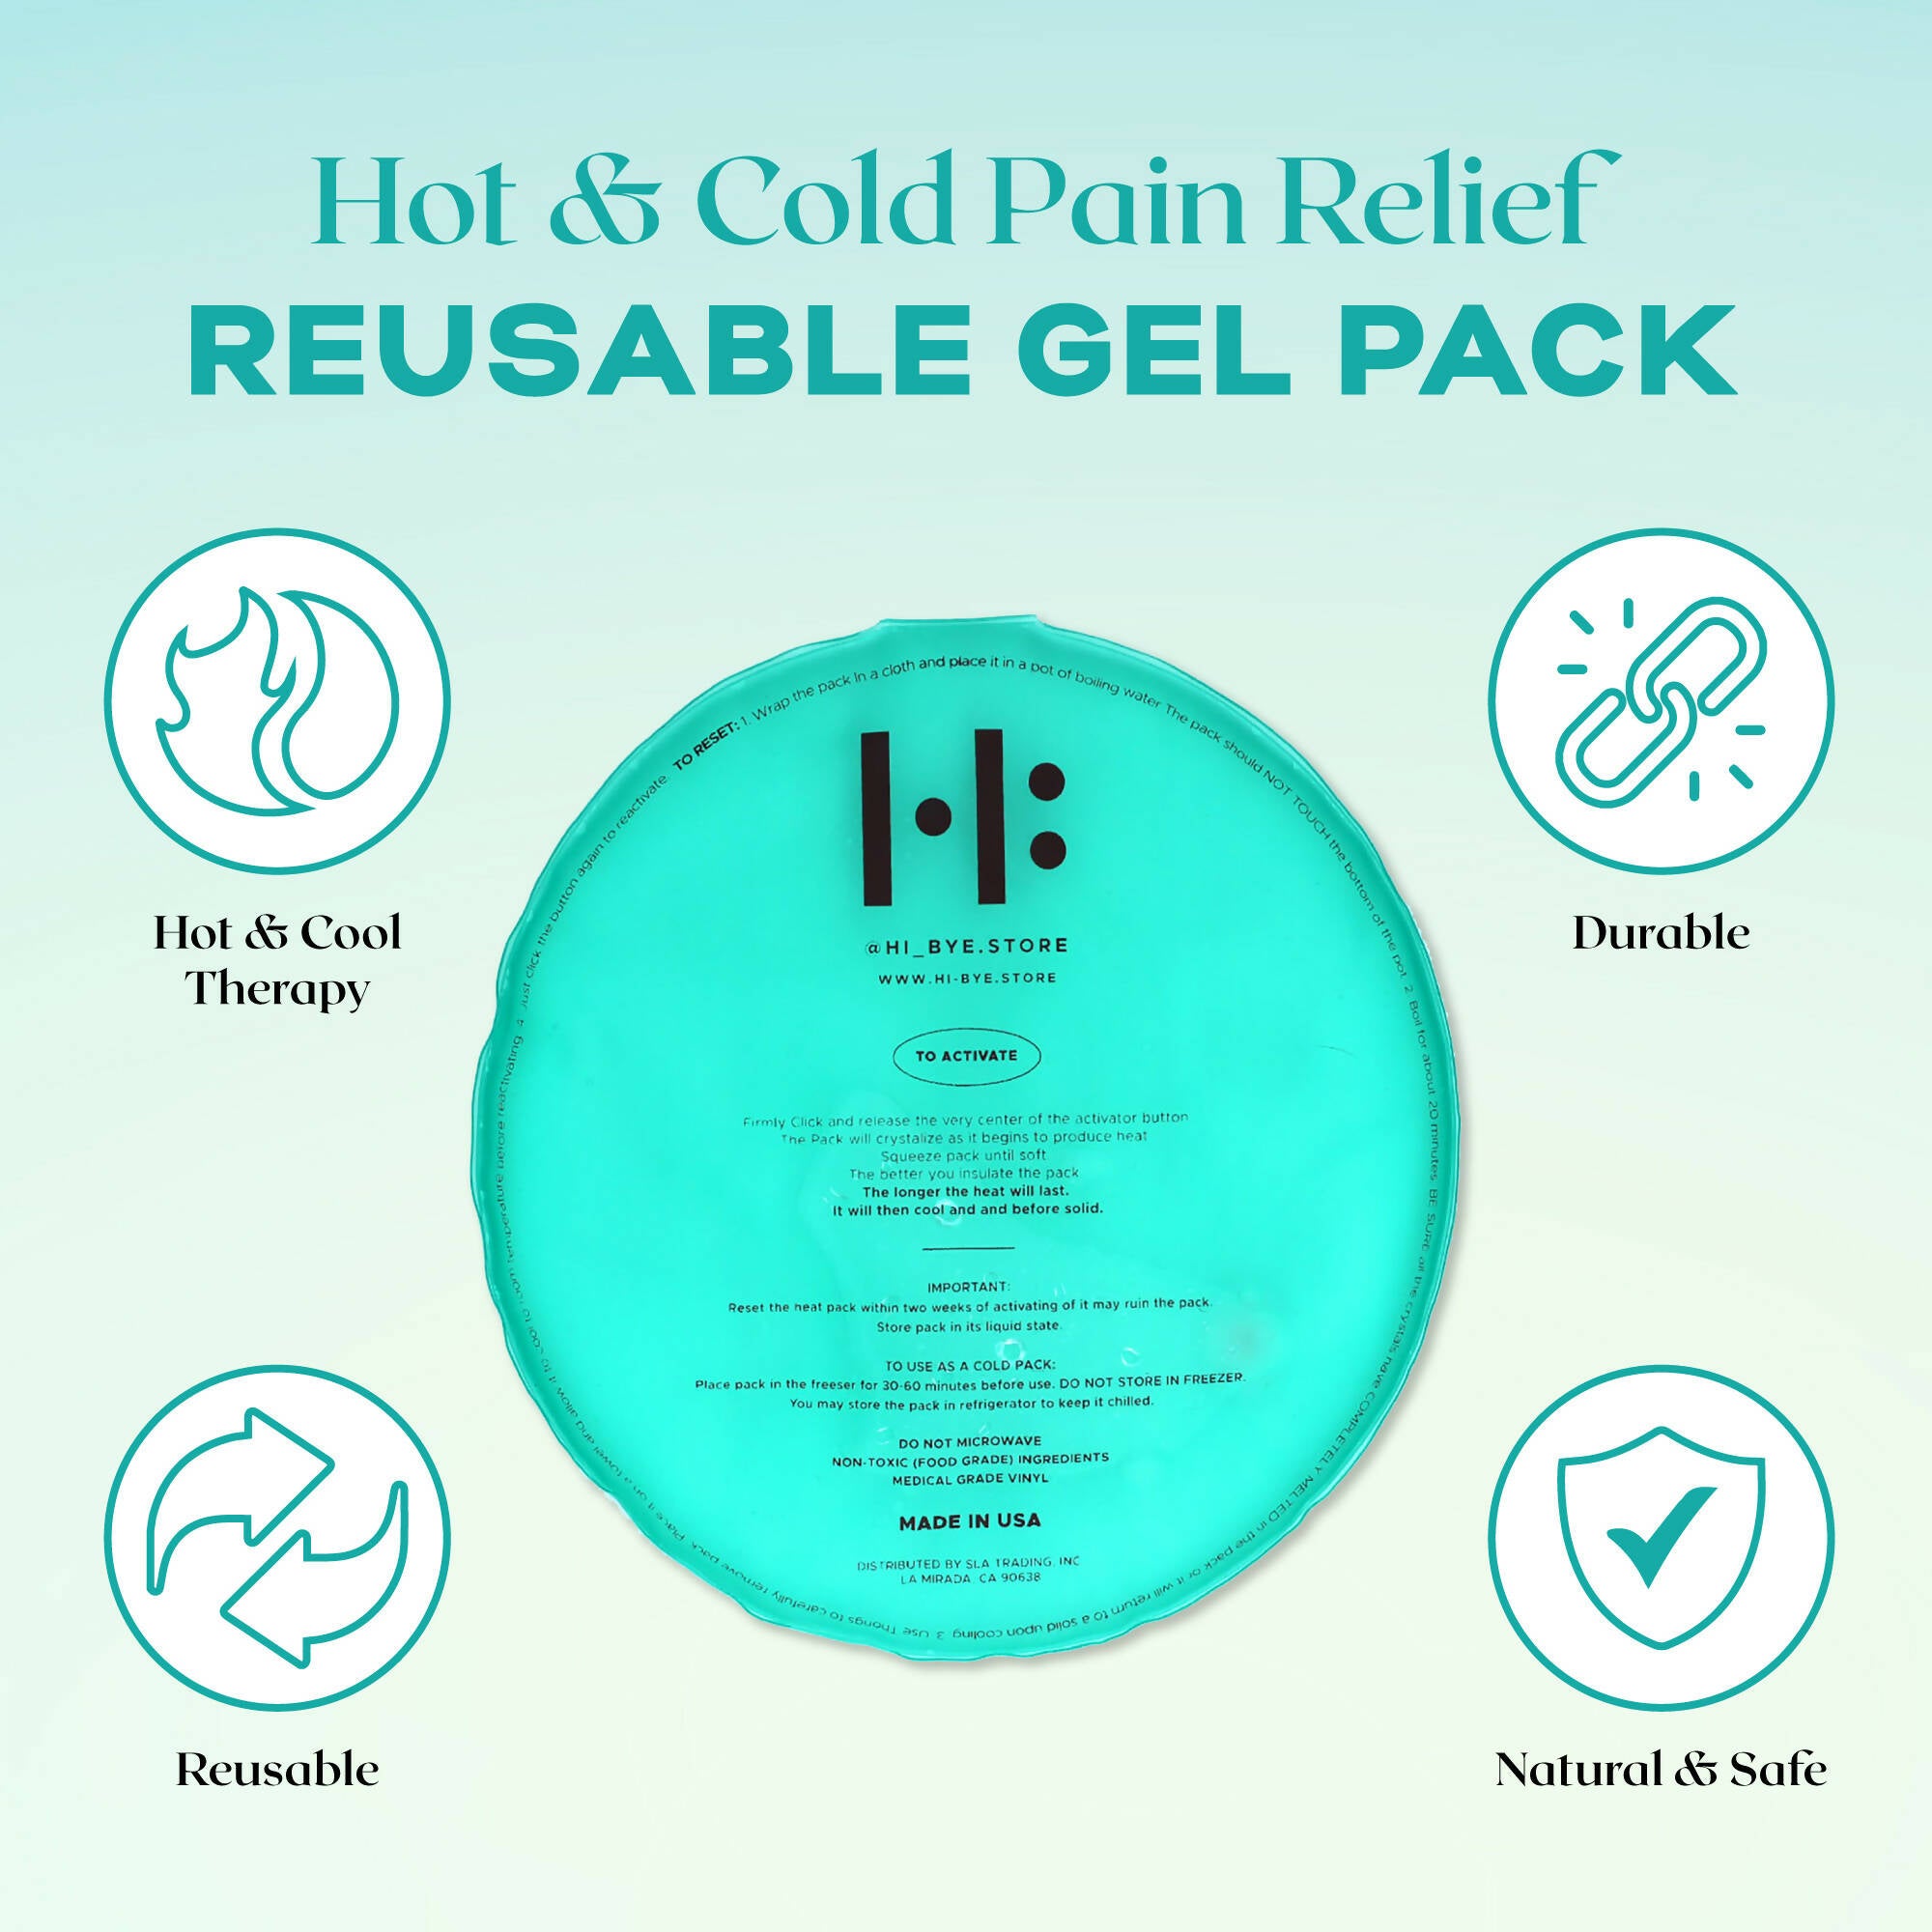 Reusable Hot & Cool Pack (2 Types) for Pain Relief, Injuries, Swelling, Bruises, Headaches, Fever, Chronic Pain, First Aid